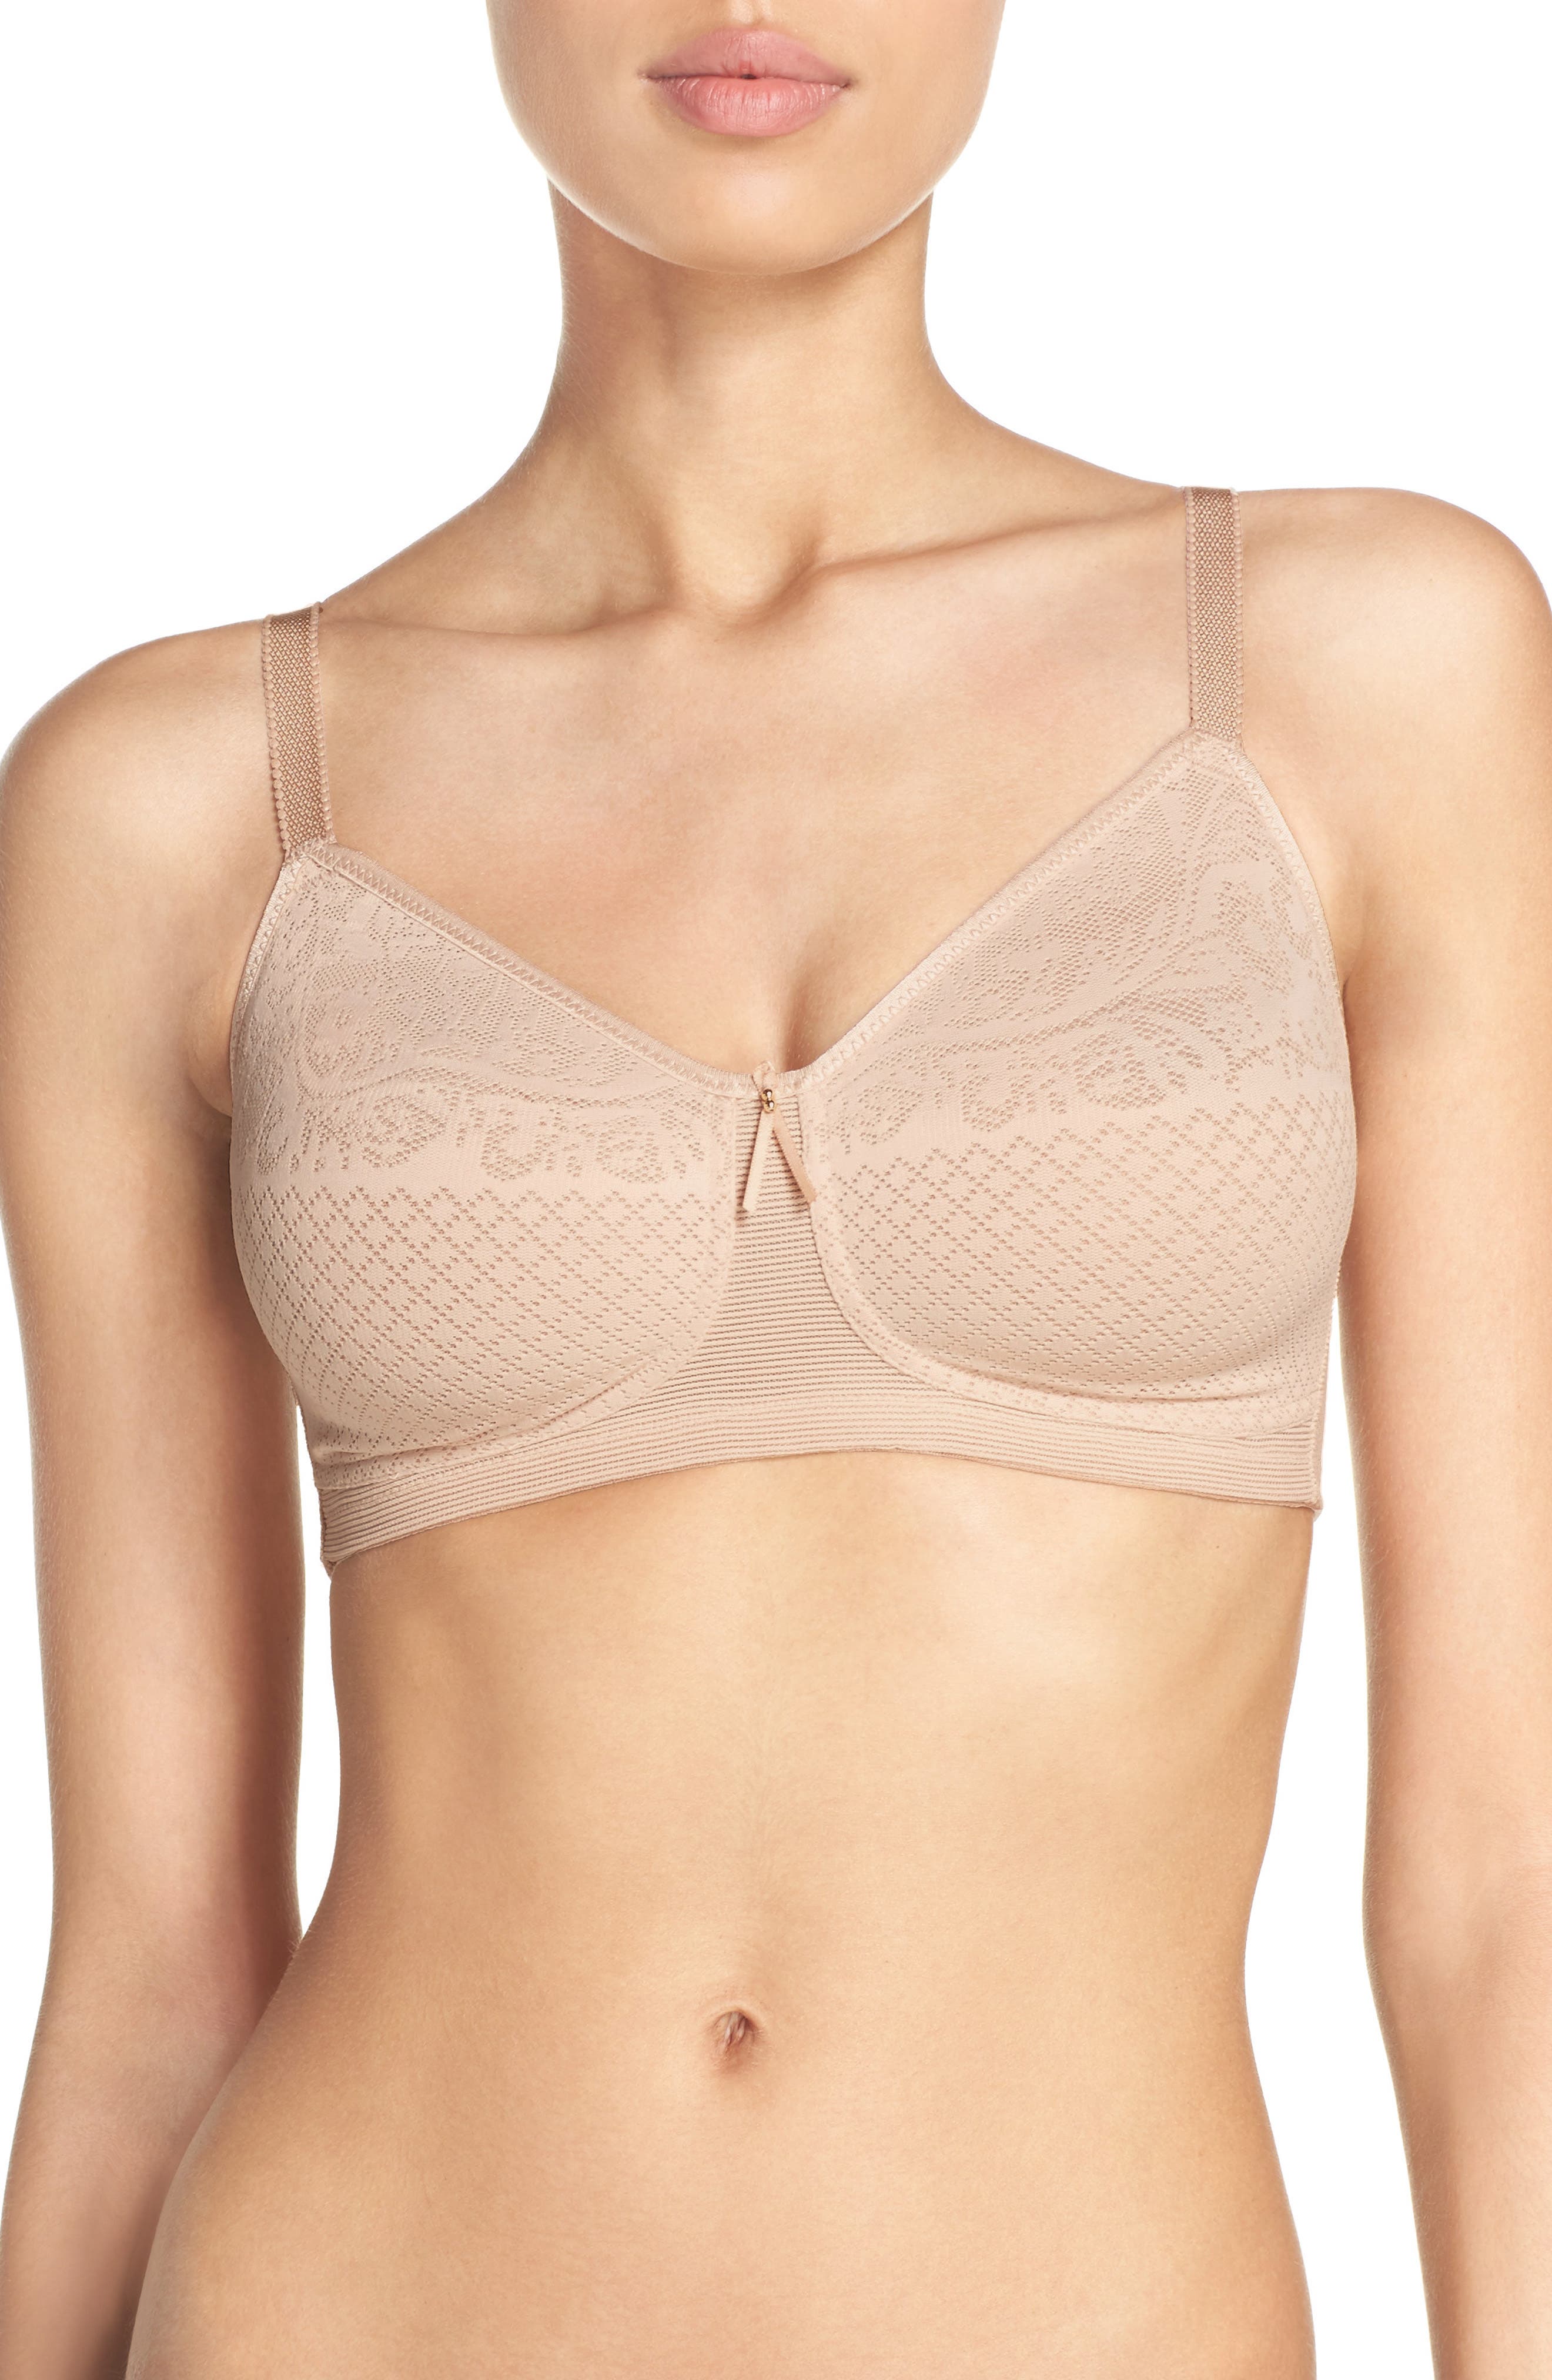 NWT Wacoal Visual Effects Wire-Free Minimizer Bra Color Sand 38D MSRP $62